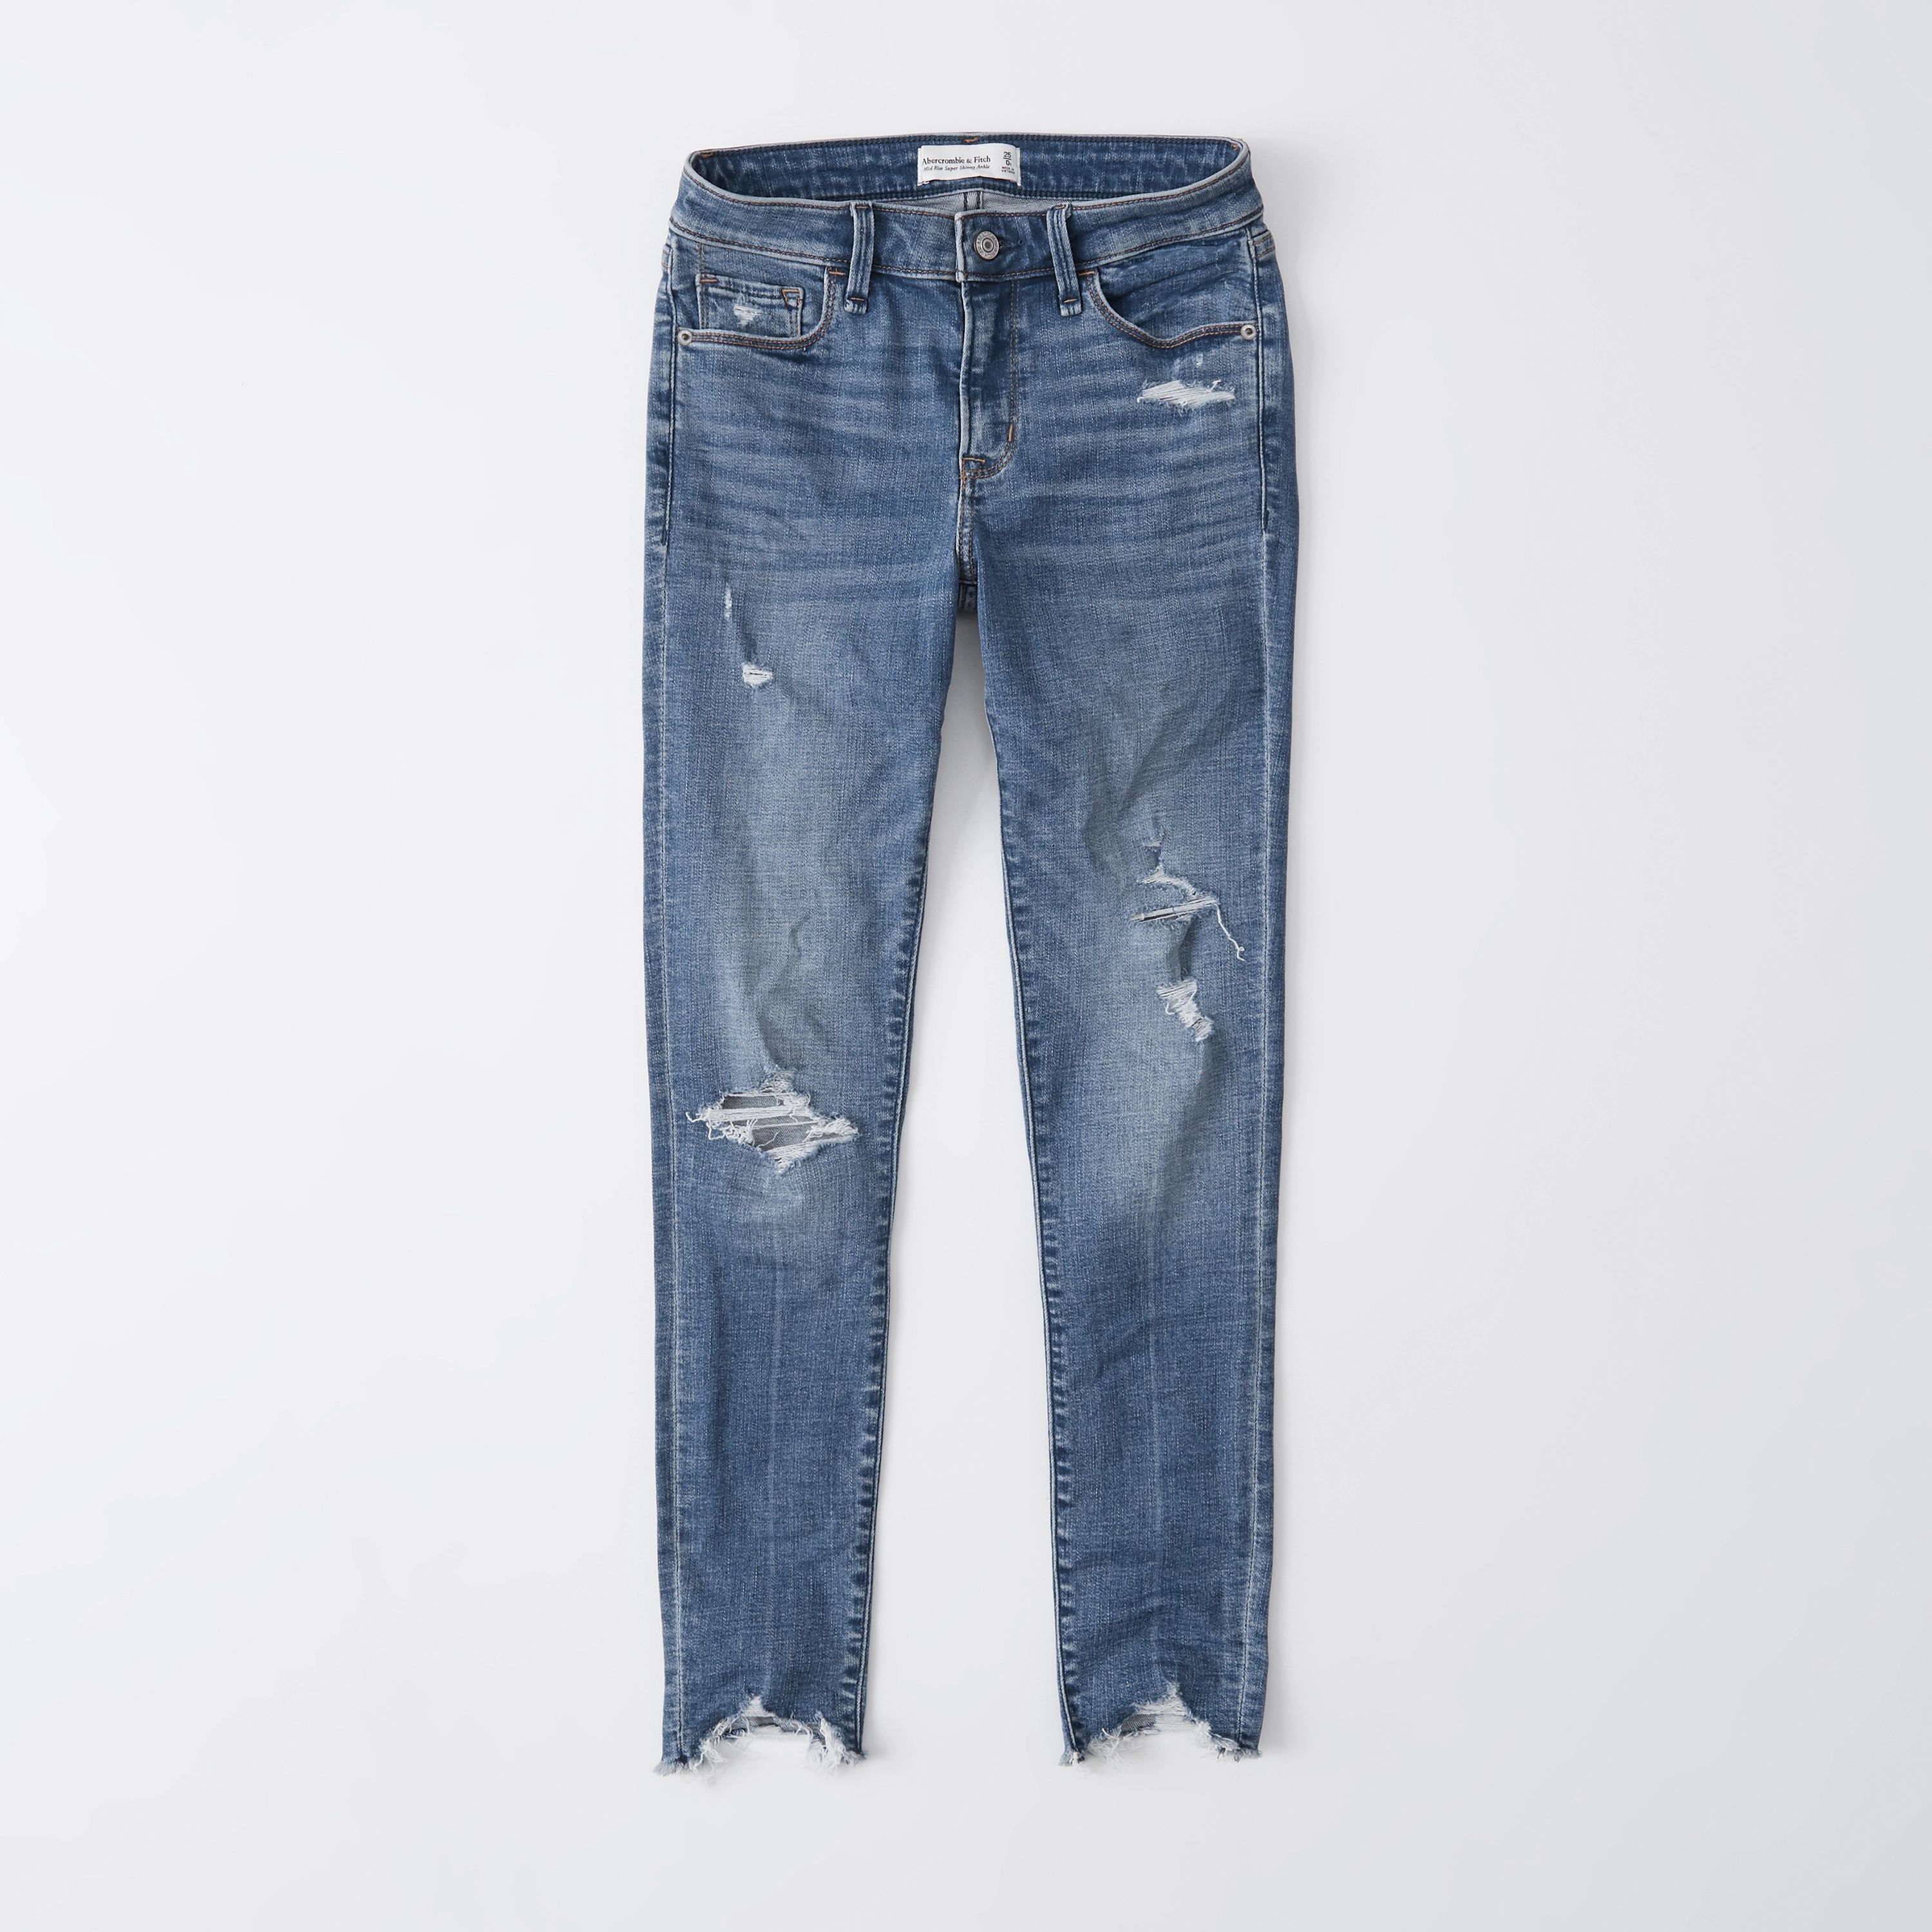 A&F Signature Stretch Denim
			


  
						Ripped Mid Rise Super Skinny Ankle Jeans
					



		
	... | Abercrombie & Fitch (US)